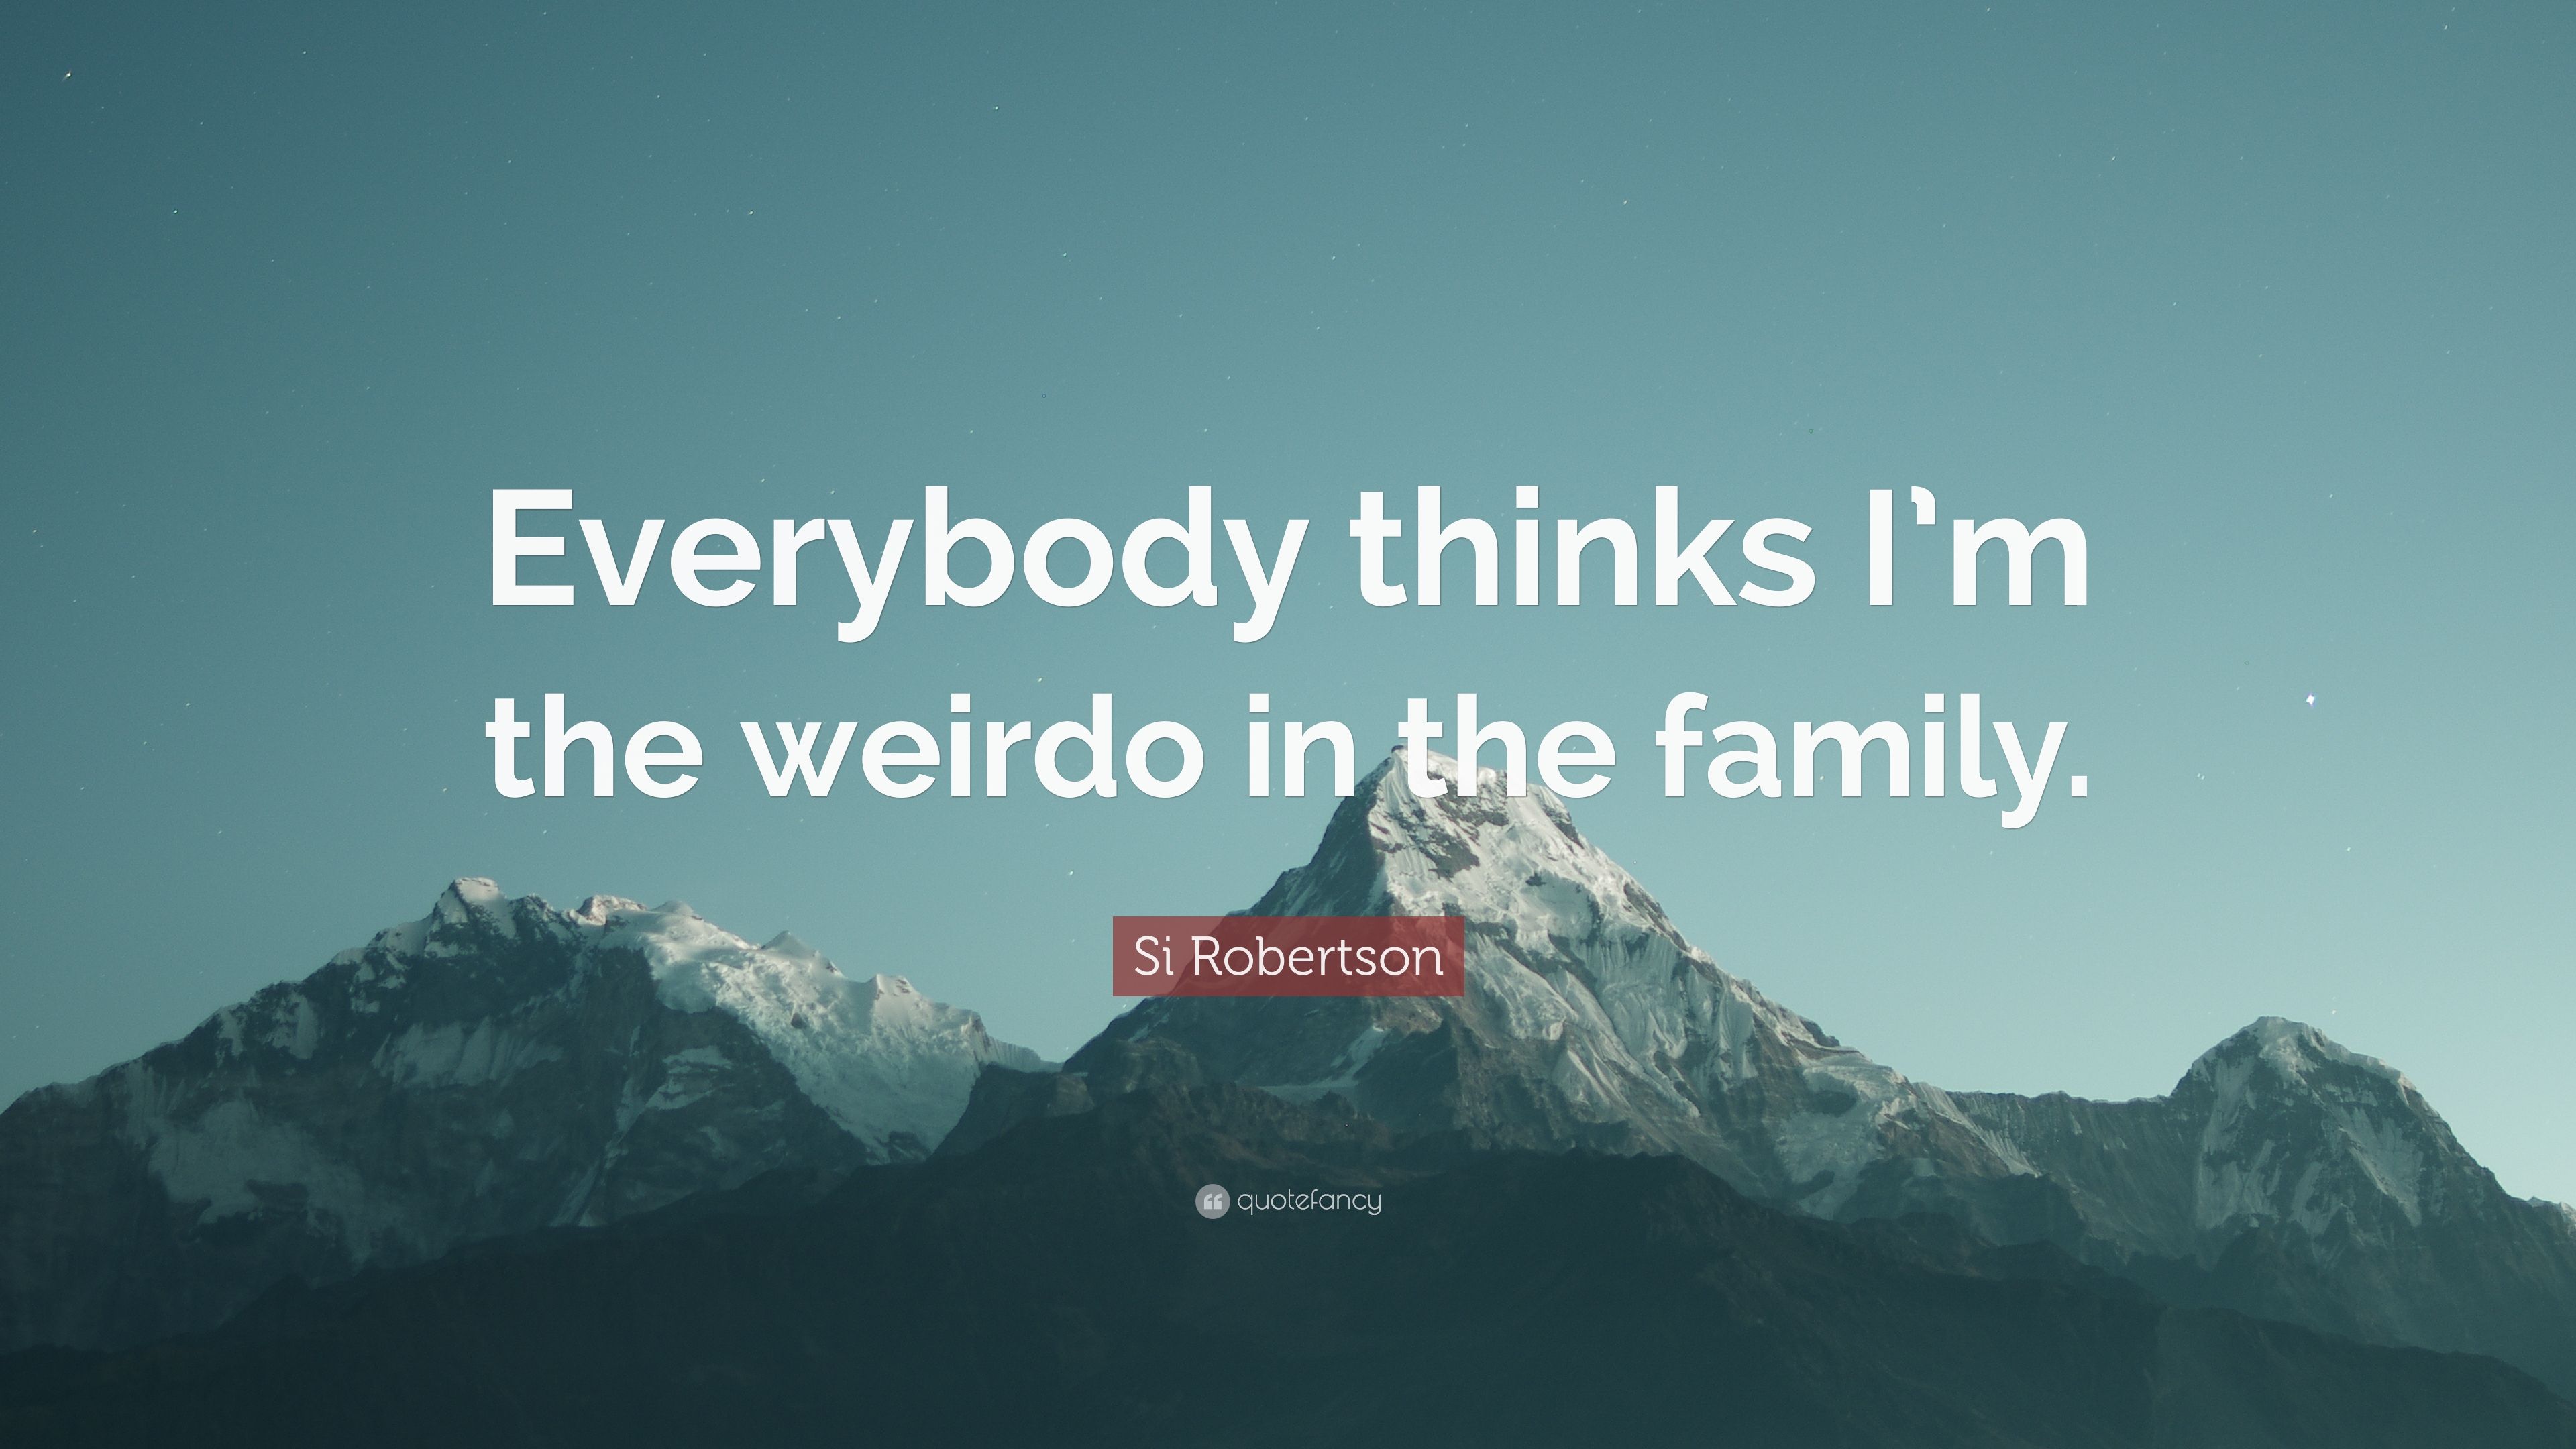 Si Robertson Quote: “Everybody thinks I .quotefancy.com